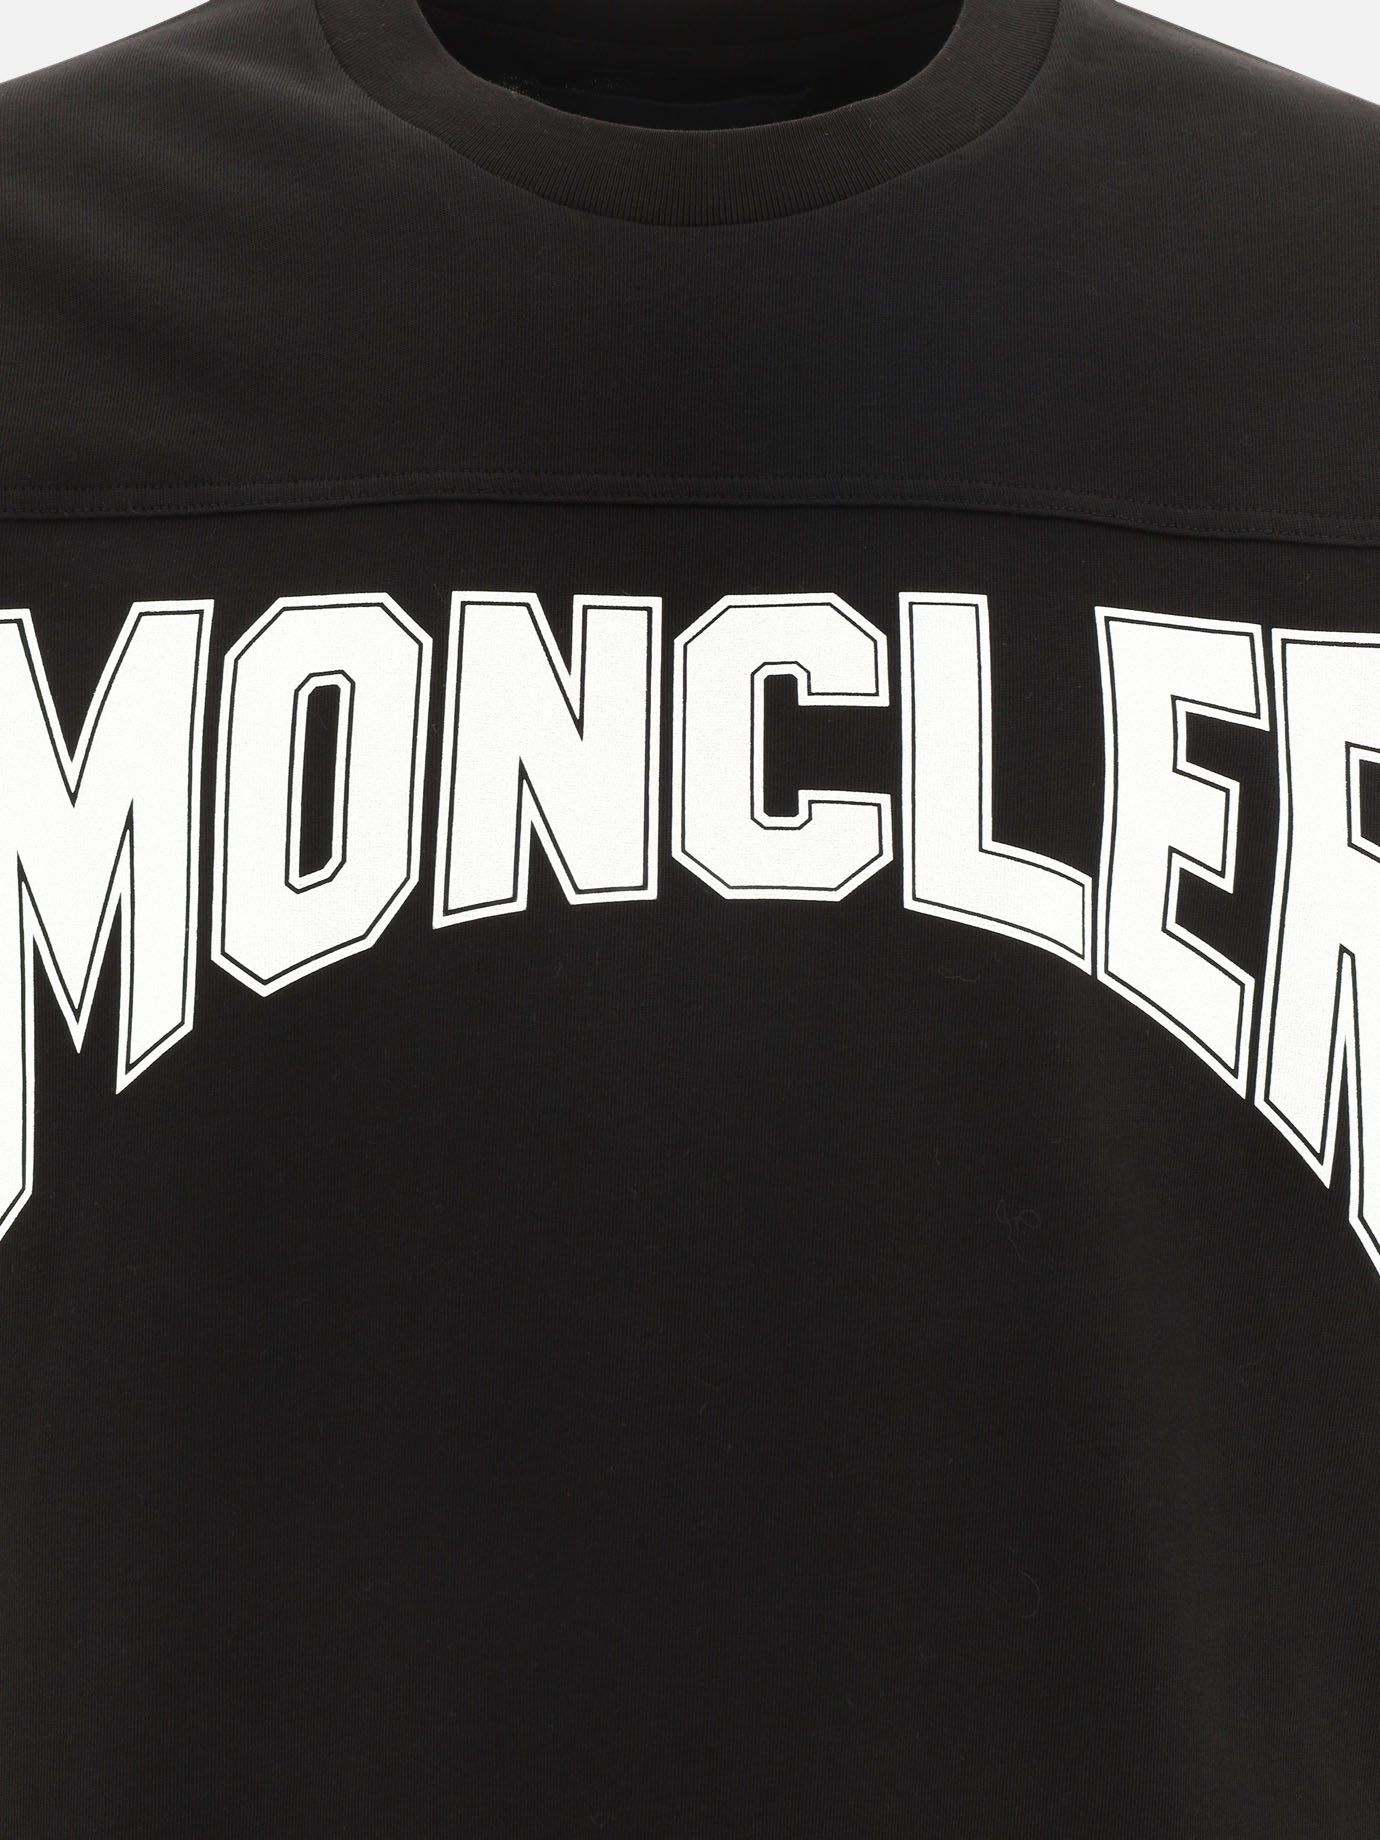 T-shirt  Moncler College  by Moncler